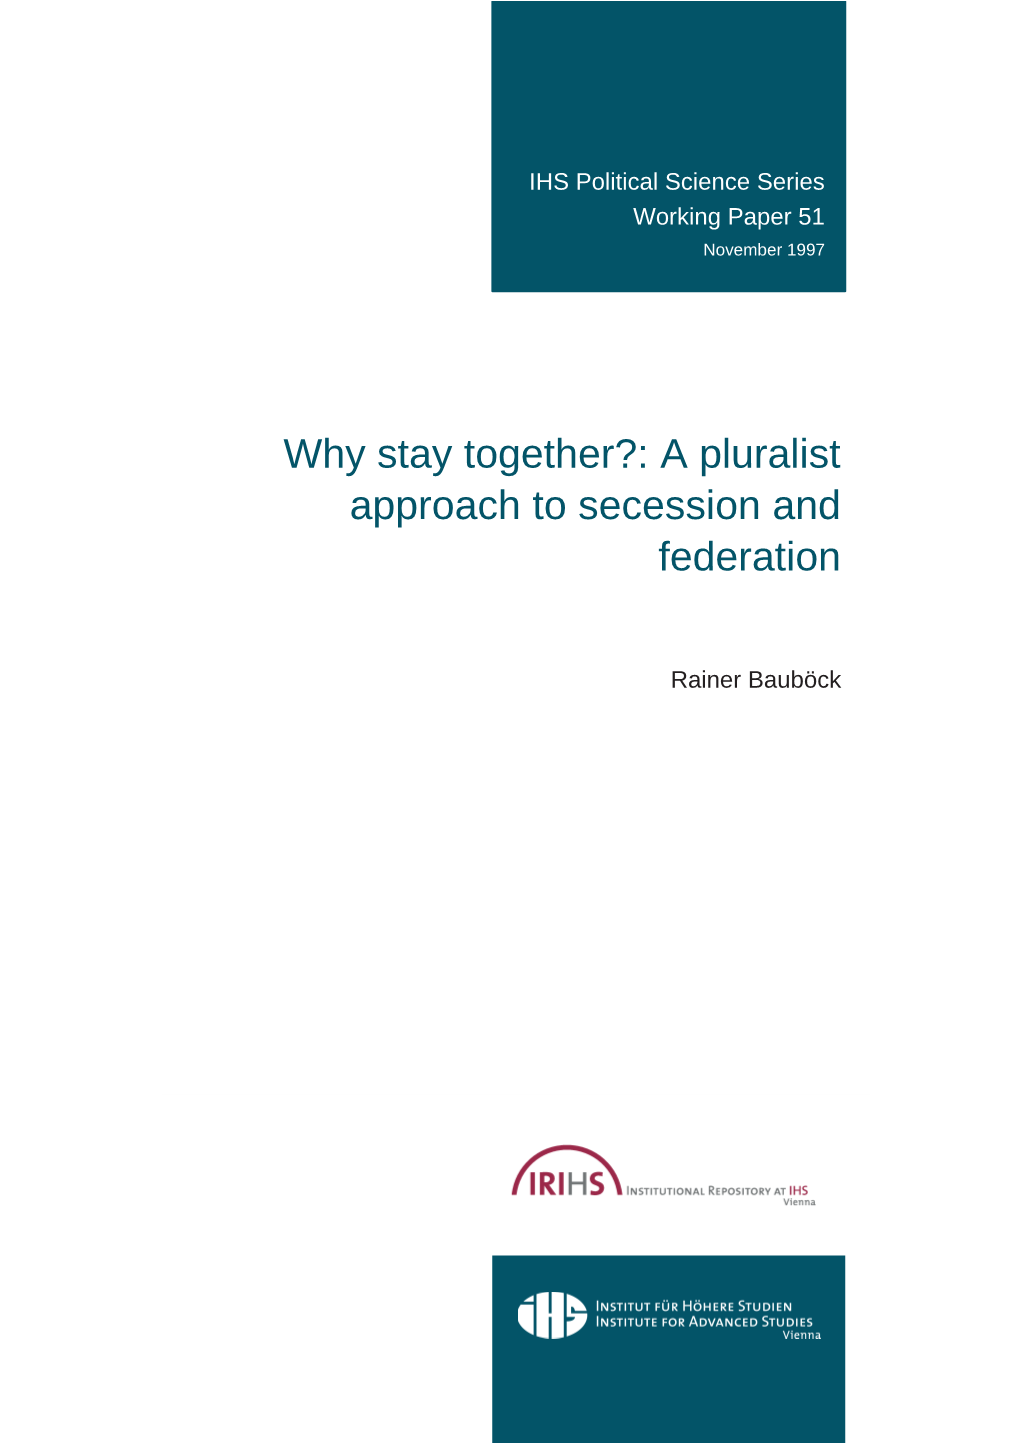 Why Stay Together?: a Pluralist Approach to Secession and Federation